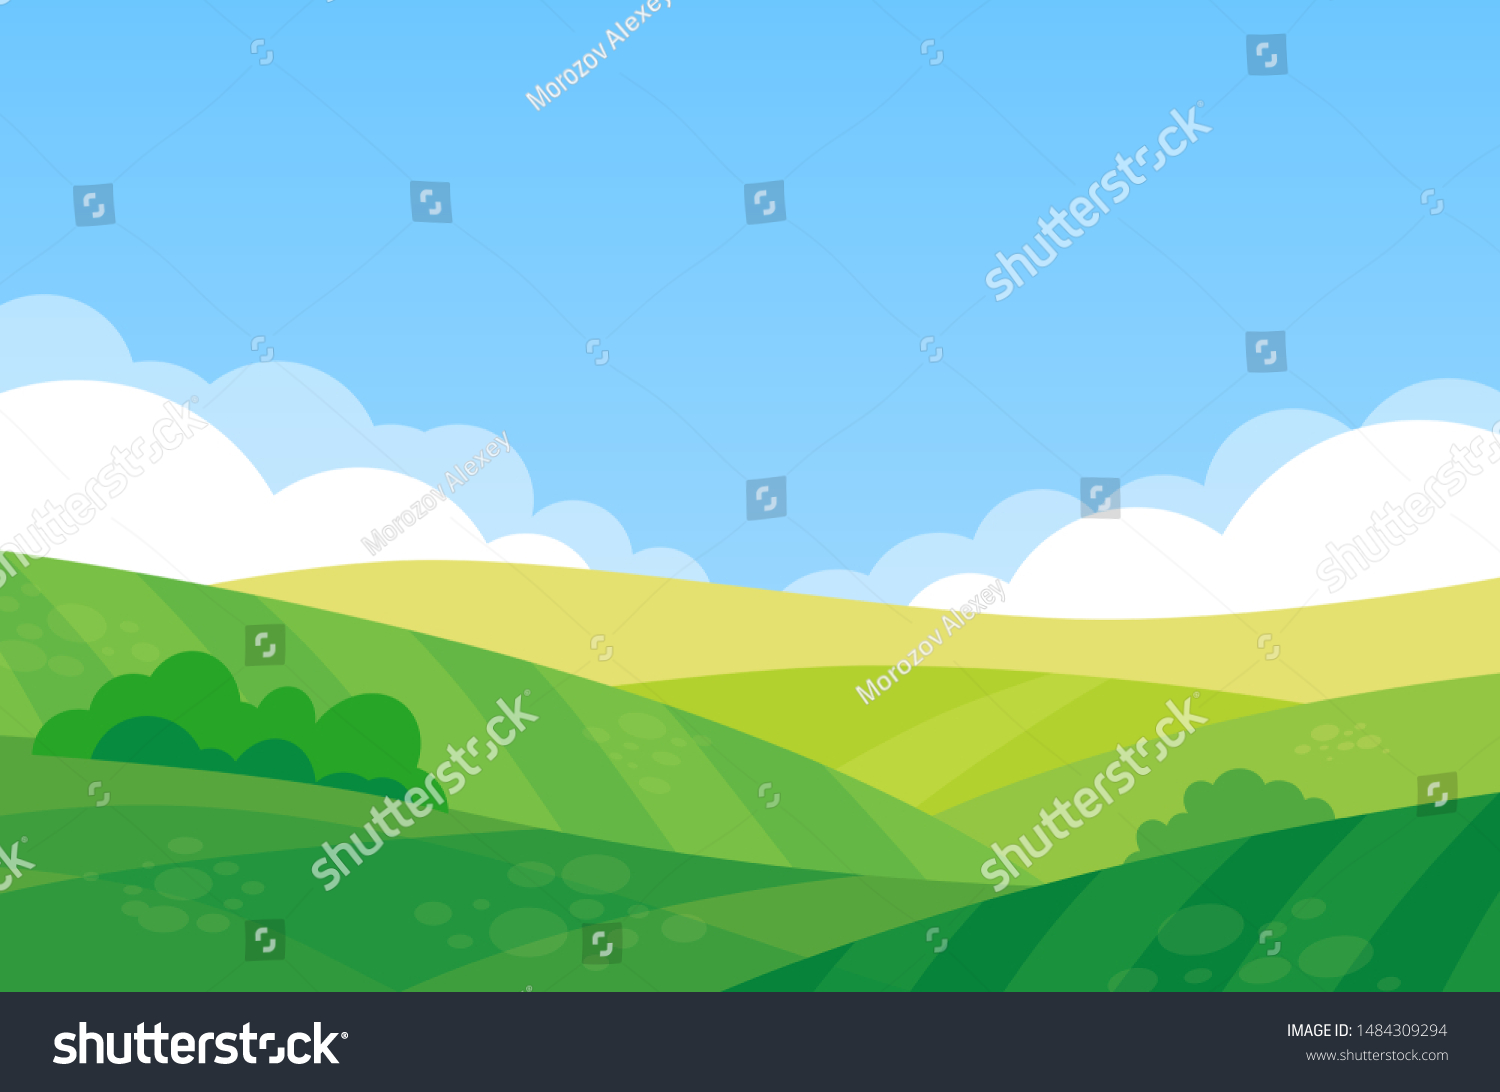 Beautiful landscape of farm field - Vector illustration of a rural summer meadow on a sunny day in flat cartoon style. #1484309294